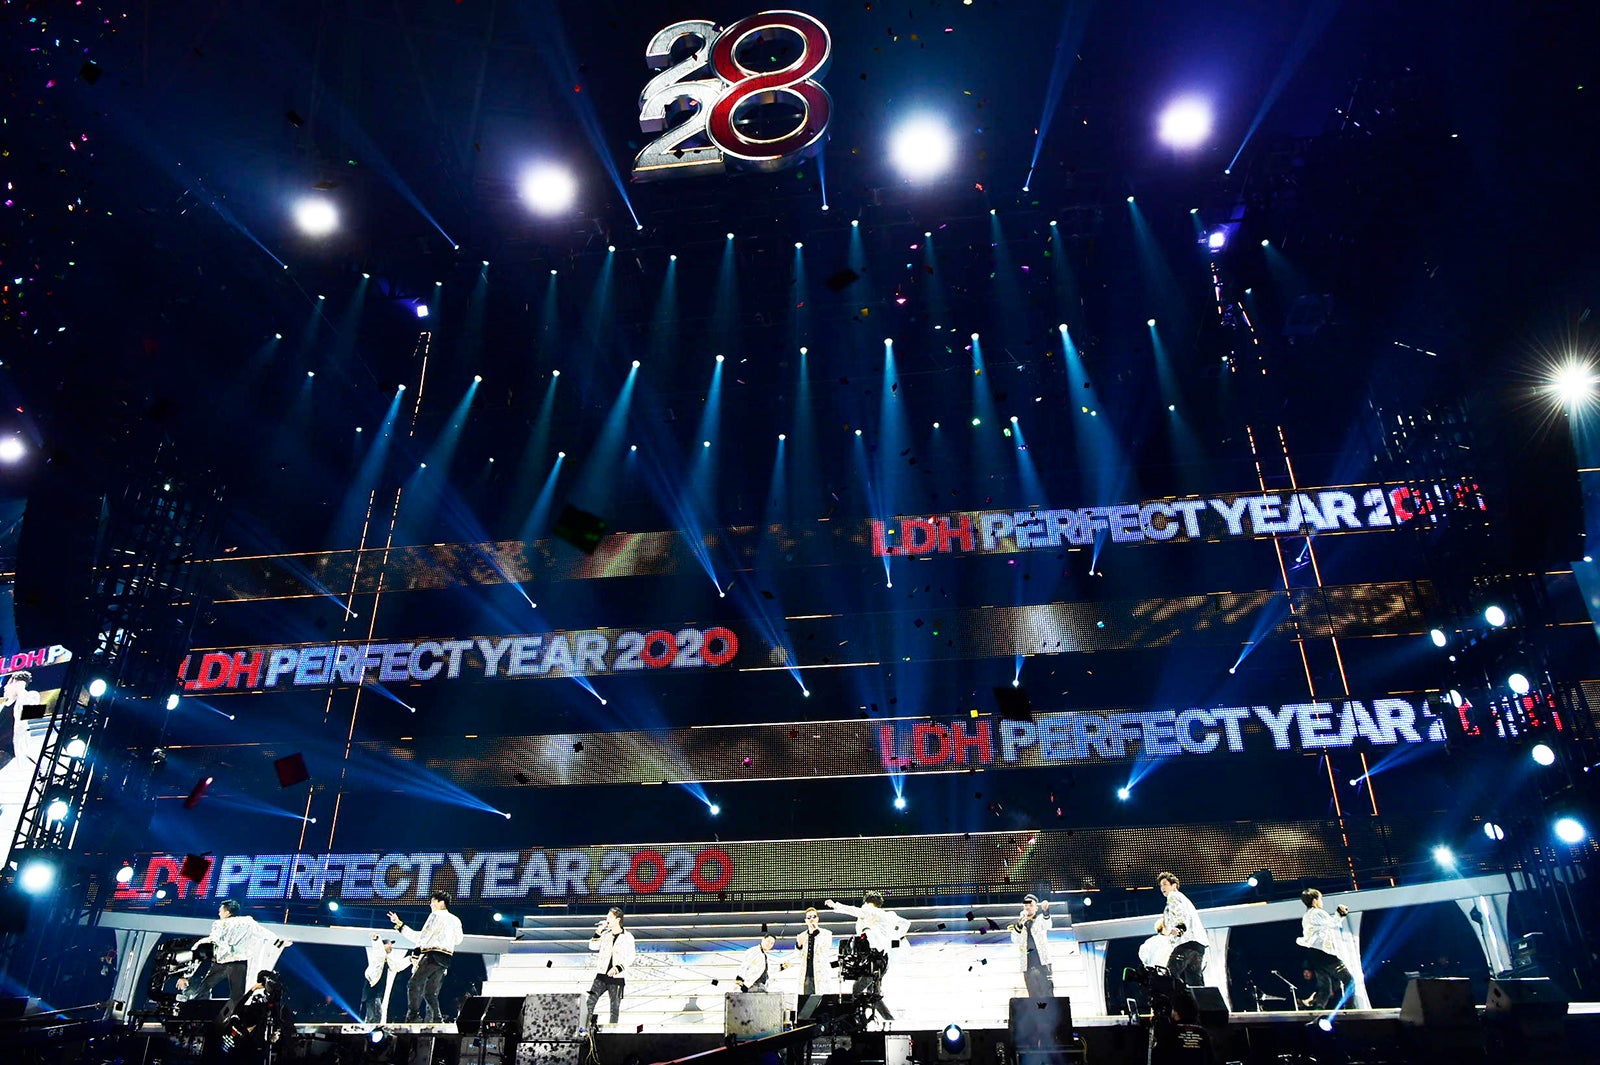 EXILE／「LDH PERFECT YEAR 2020 COUNTDOWN LIVE 2019→2020“RISING”」より（画像提供：所属事務所）